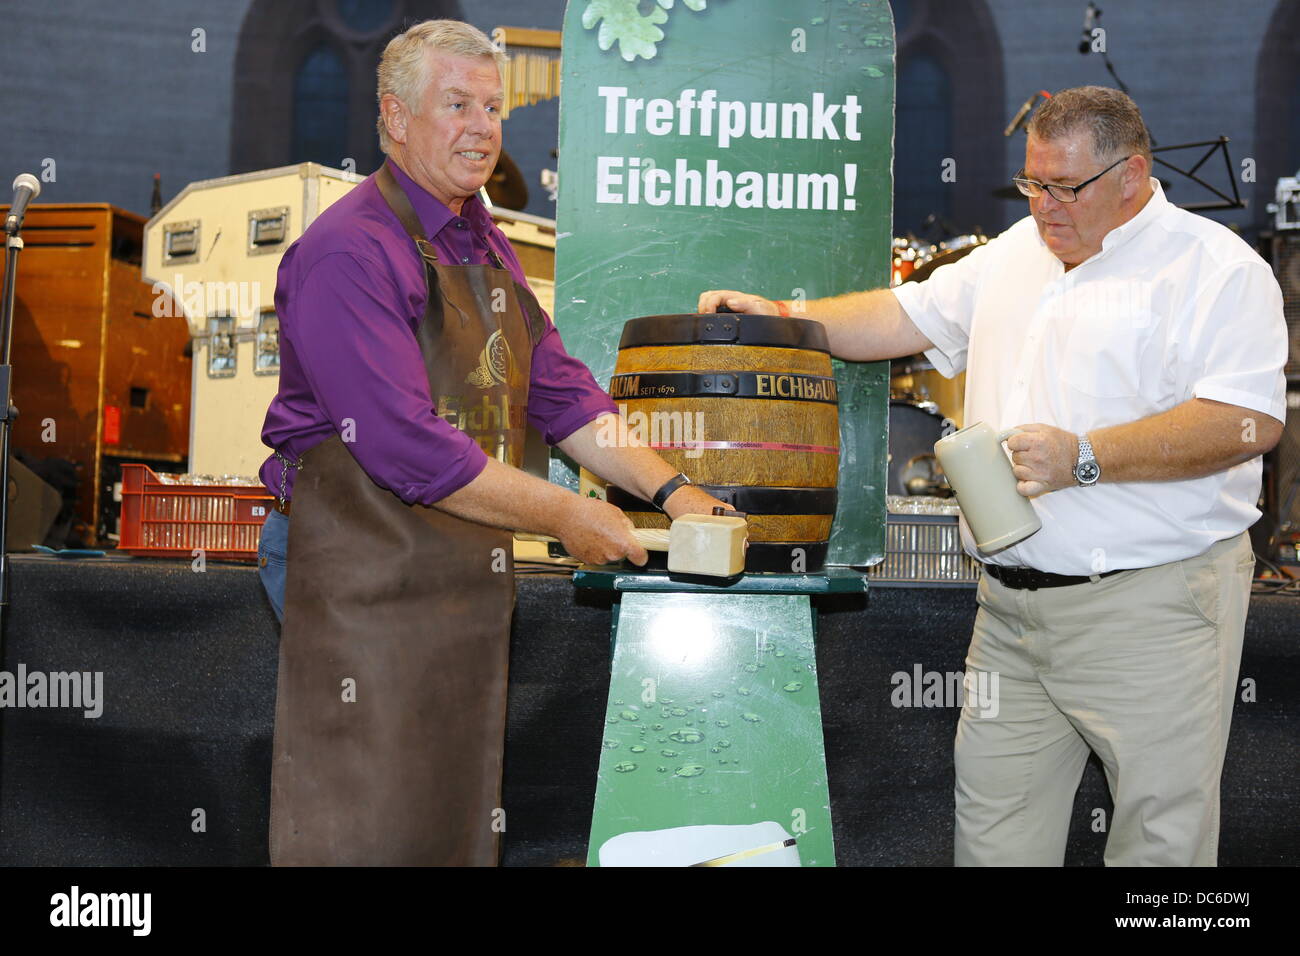 Worms, Germany. 9th August 2013. The Lord Mayor of Worms, Michael Kissel (L), taps a keg of beer. The Lord Mayor of Worms, Michael Kissel, opened the Jazz & Joy Festival 2013 with a traditional keg-tapping ceremony. The Jazz & Joy Festival runs for three days in the shadow of the Cathedral of Worms. Credit:  Michael Debets/Alamy Live News Stock Photo